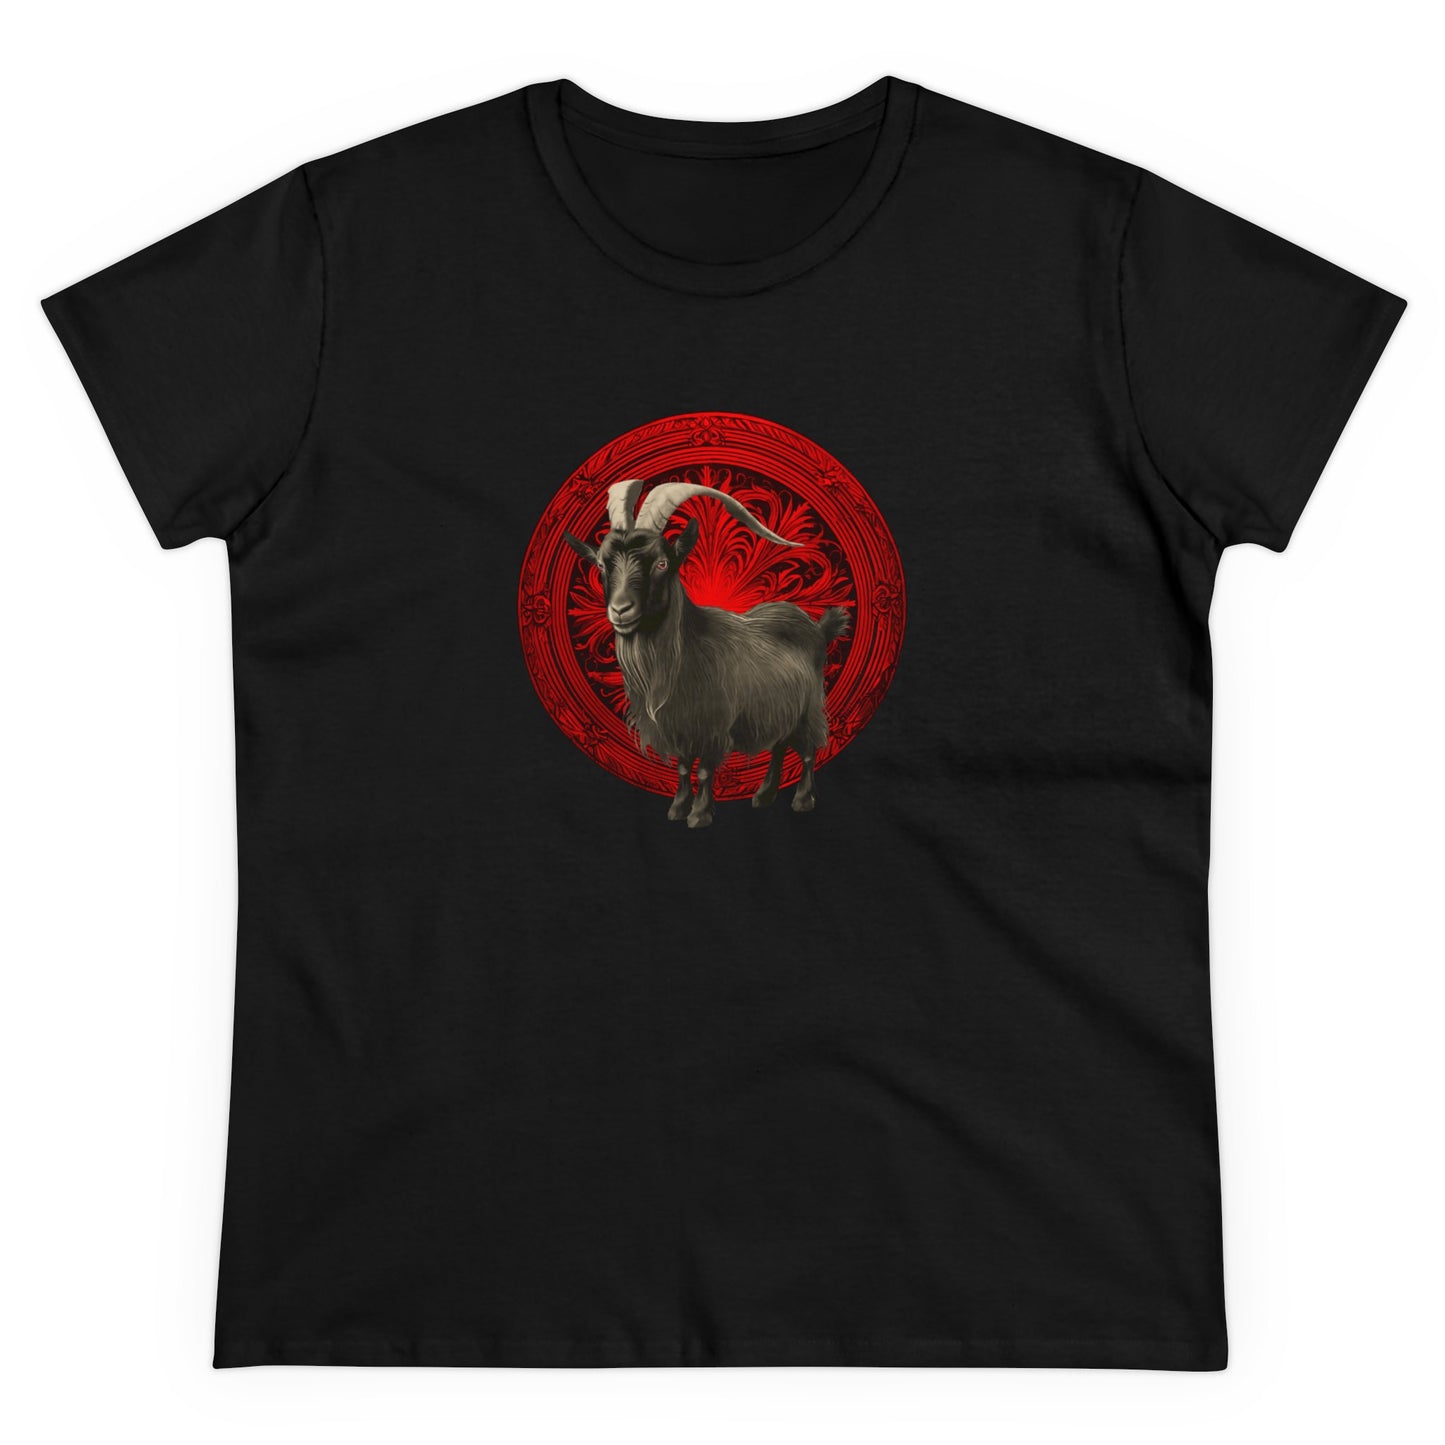 The Witch's Movie Coven "Movie Goat - Red" Women's Midweight Cotton Tee